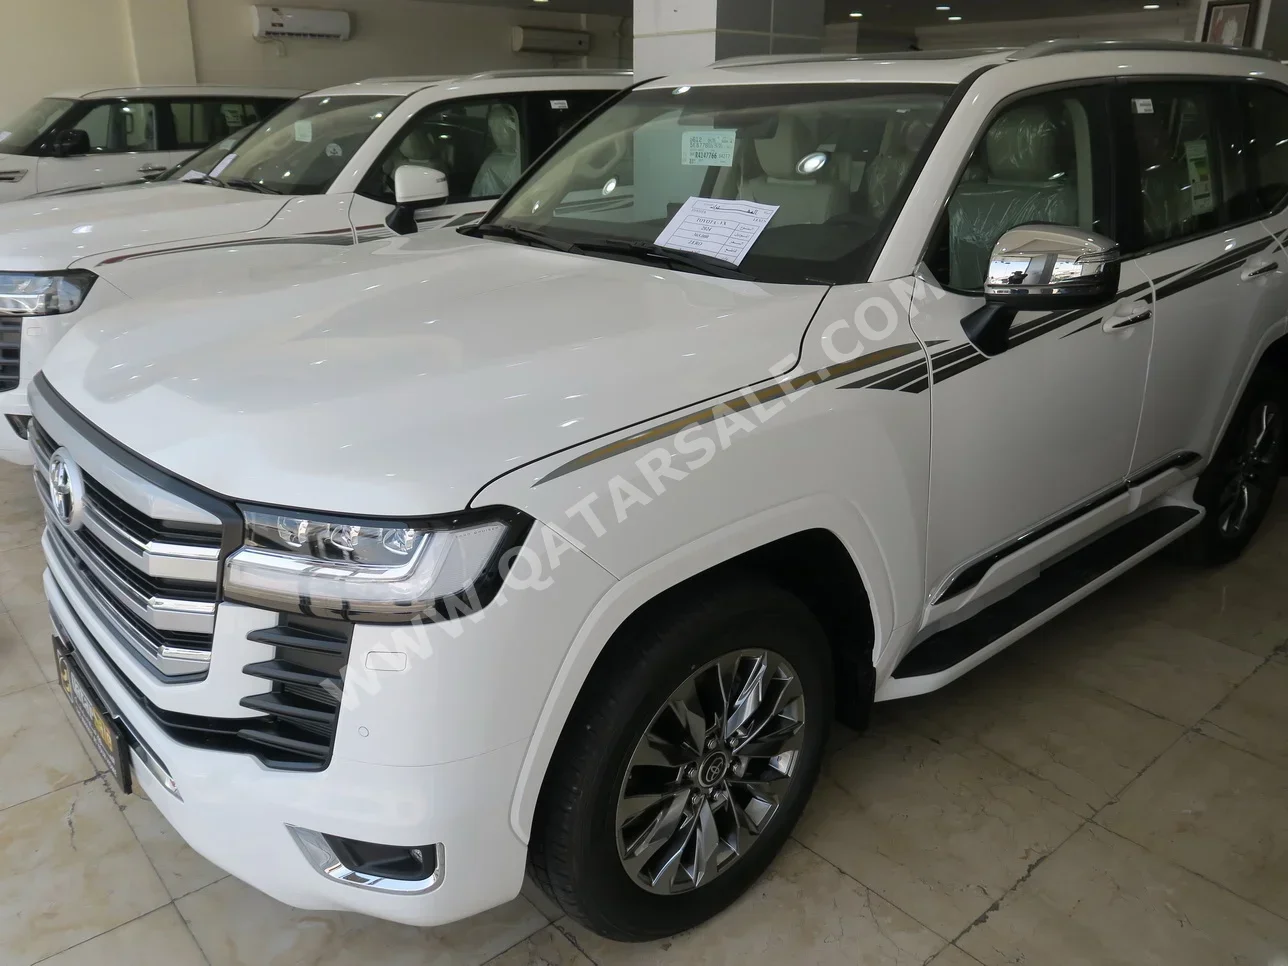  Toyota  Land Cruiser  VX Twin Turbo  2024  Automatic  0 Km  6 Cylinder  Four Wheel Drive (4WD)  SUV  White  With Warranty